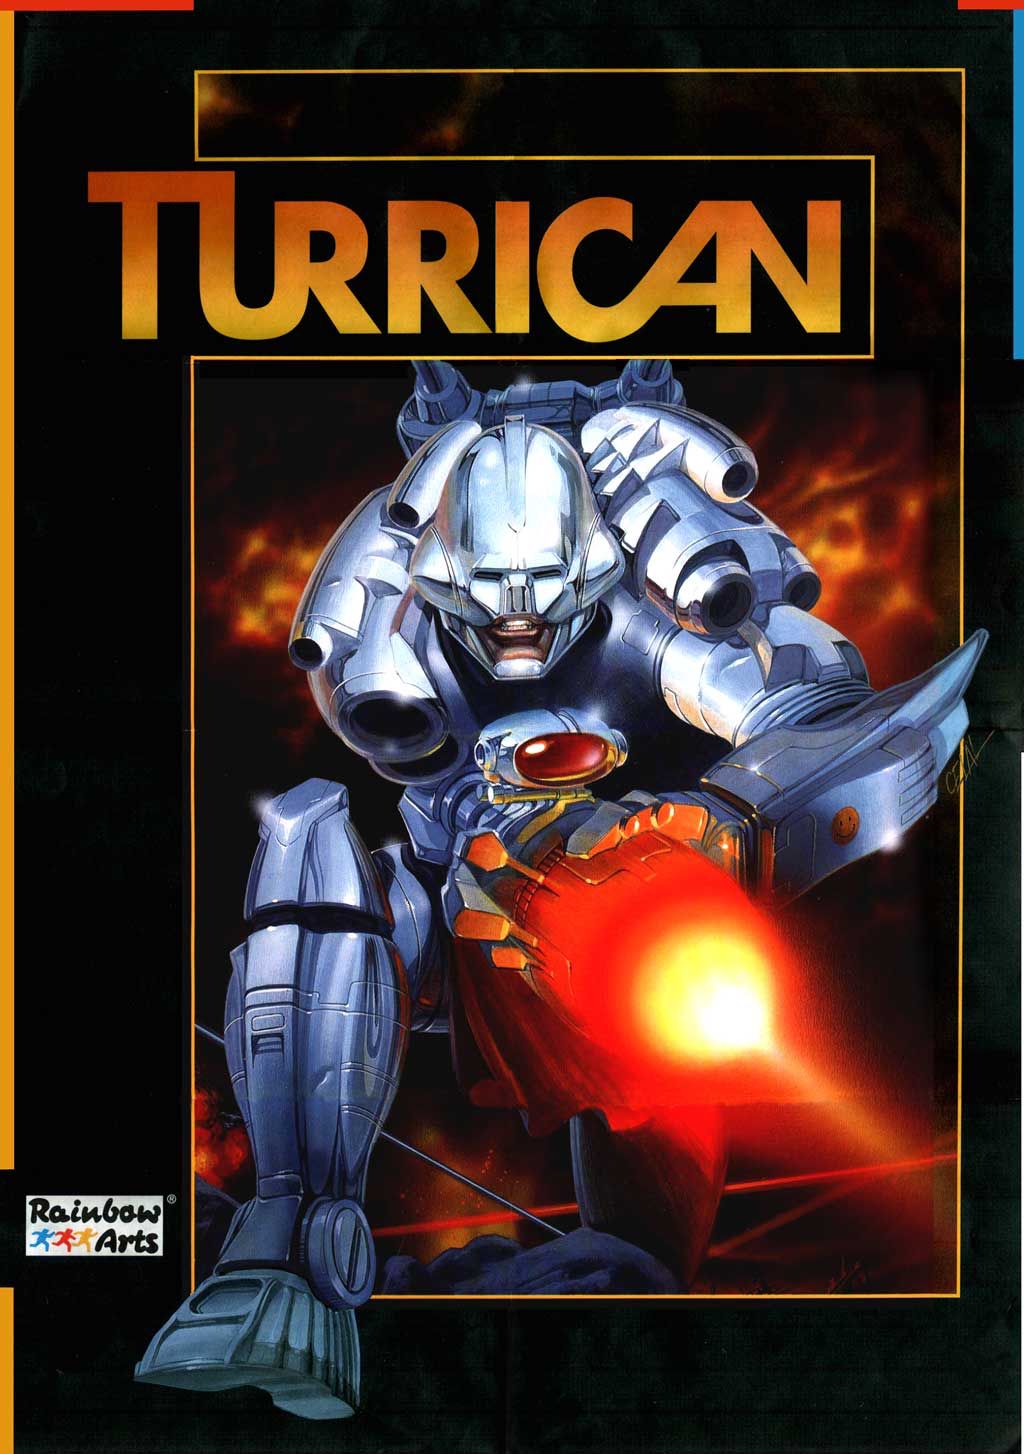 Image for Turrican special 30th birthday edition will be revealed at gamescom Opening Night Live